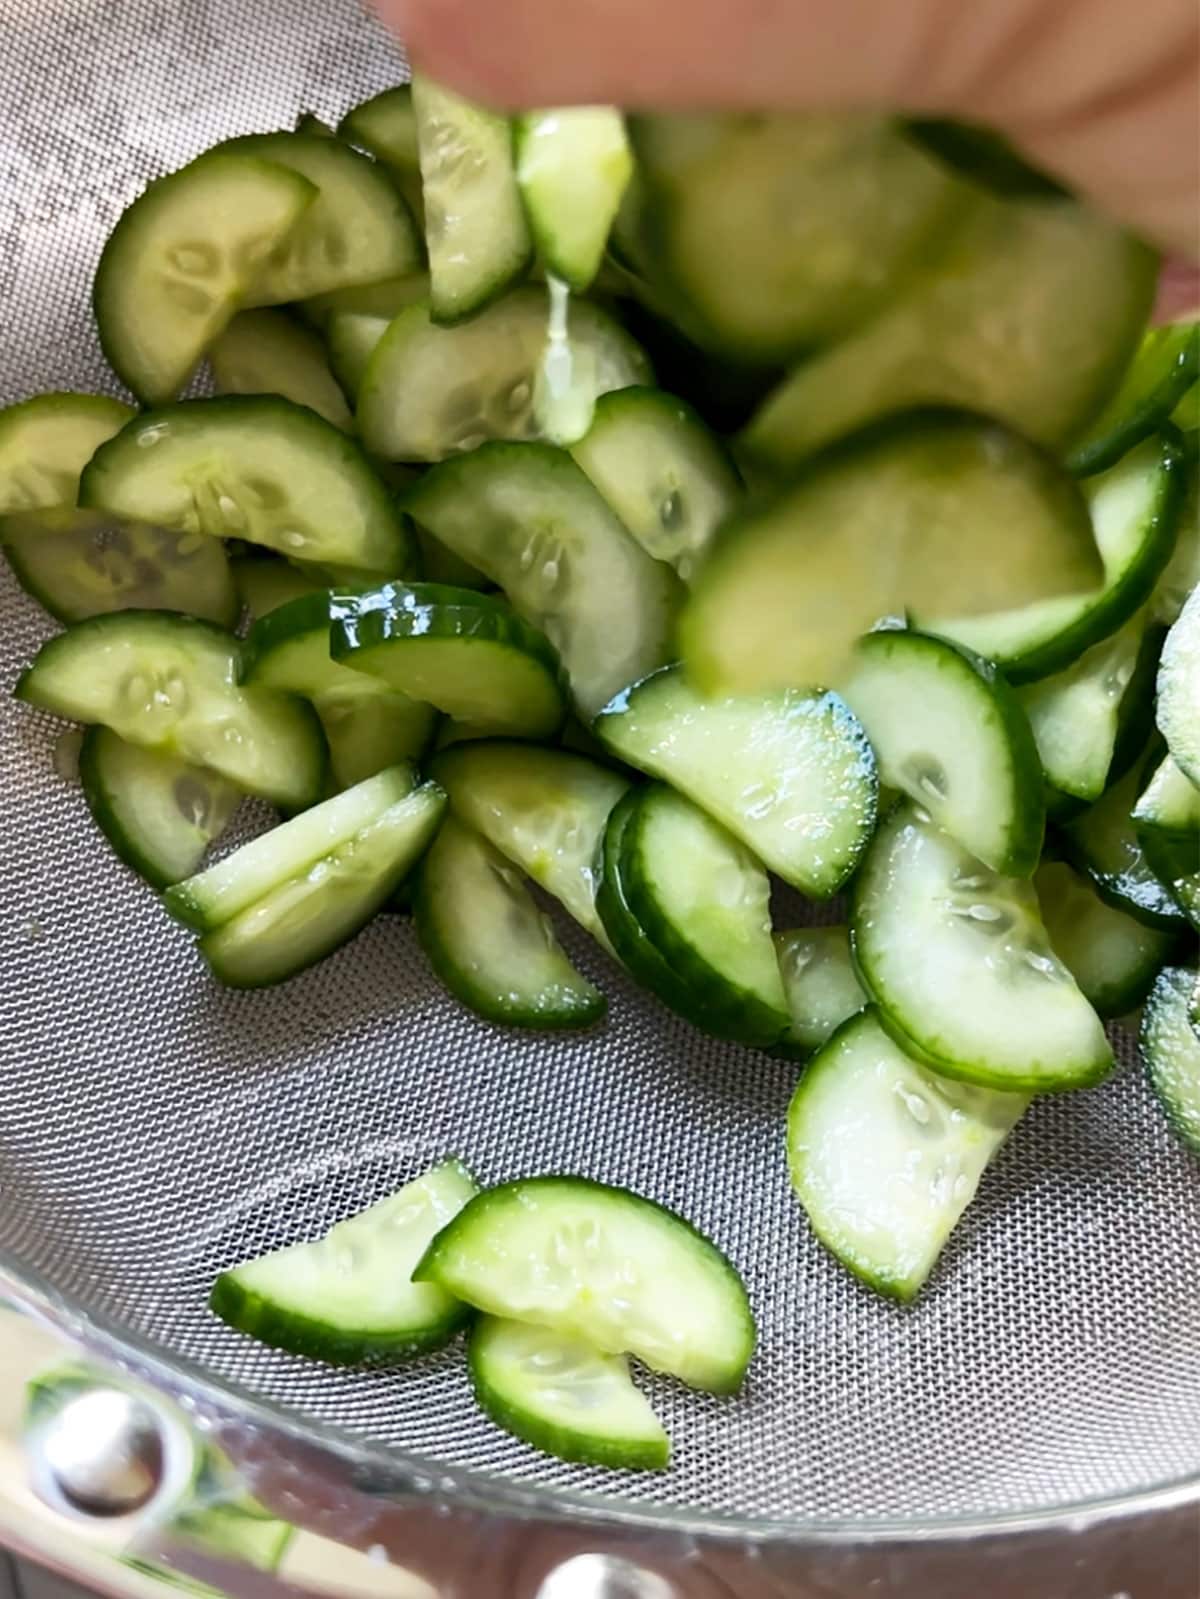 Squeezing water out of cucumbers over a strainer.